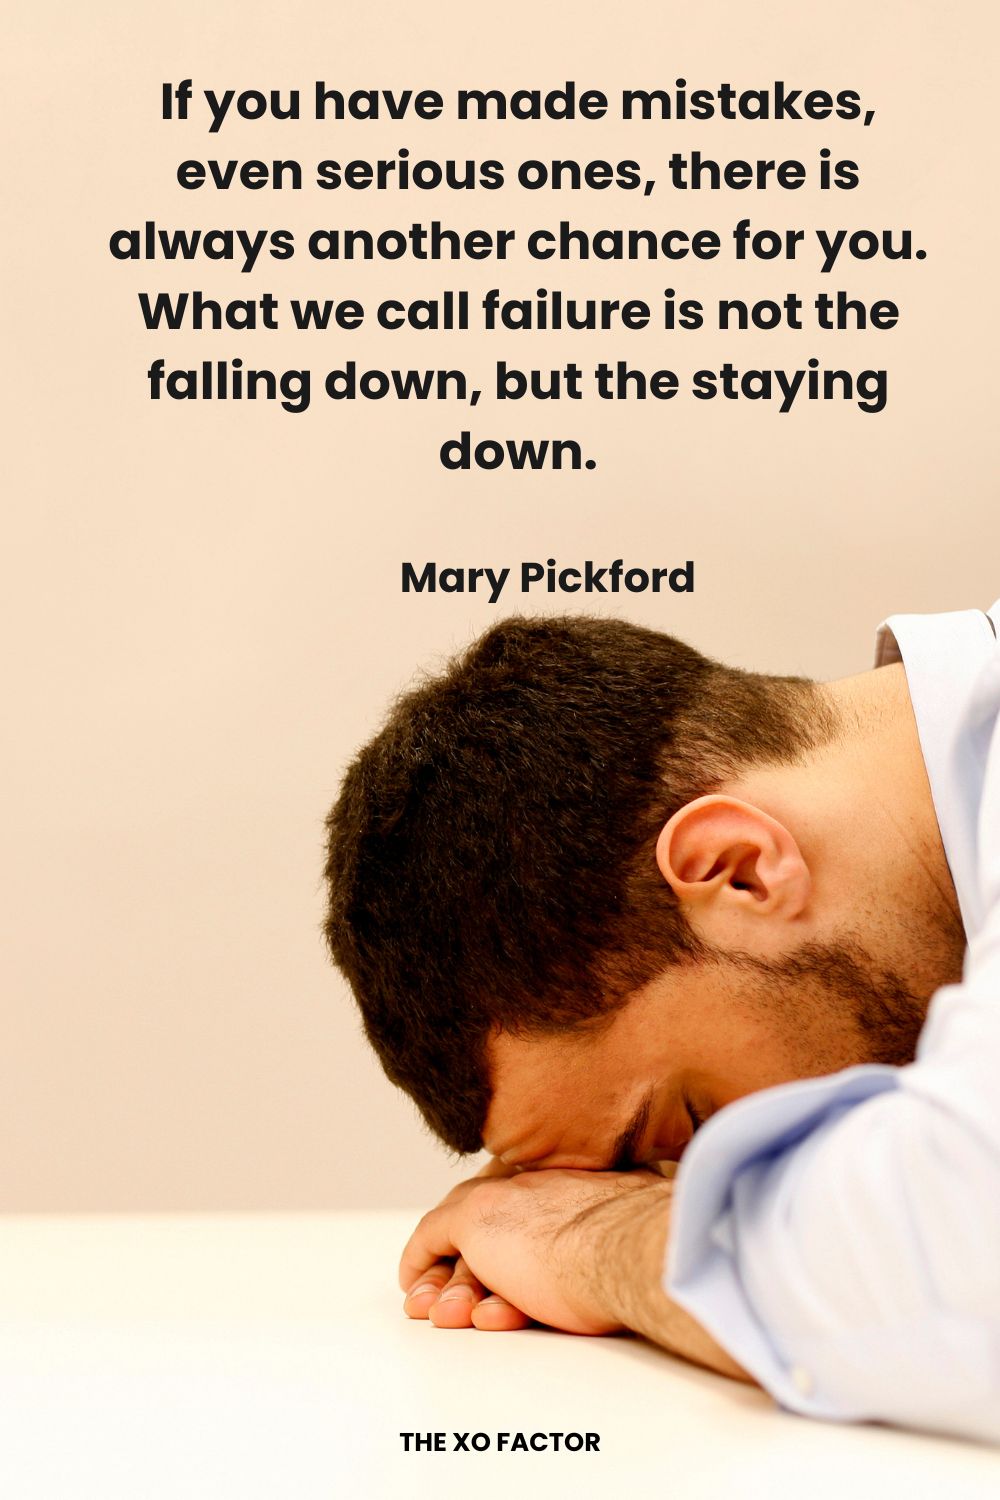 If you have made mistakes, even serious ones, there is always another chance for you.  What we call failure is not the falling down, but the staying down. Mary Pickford